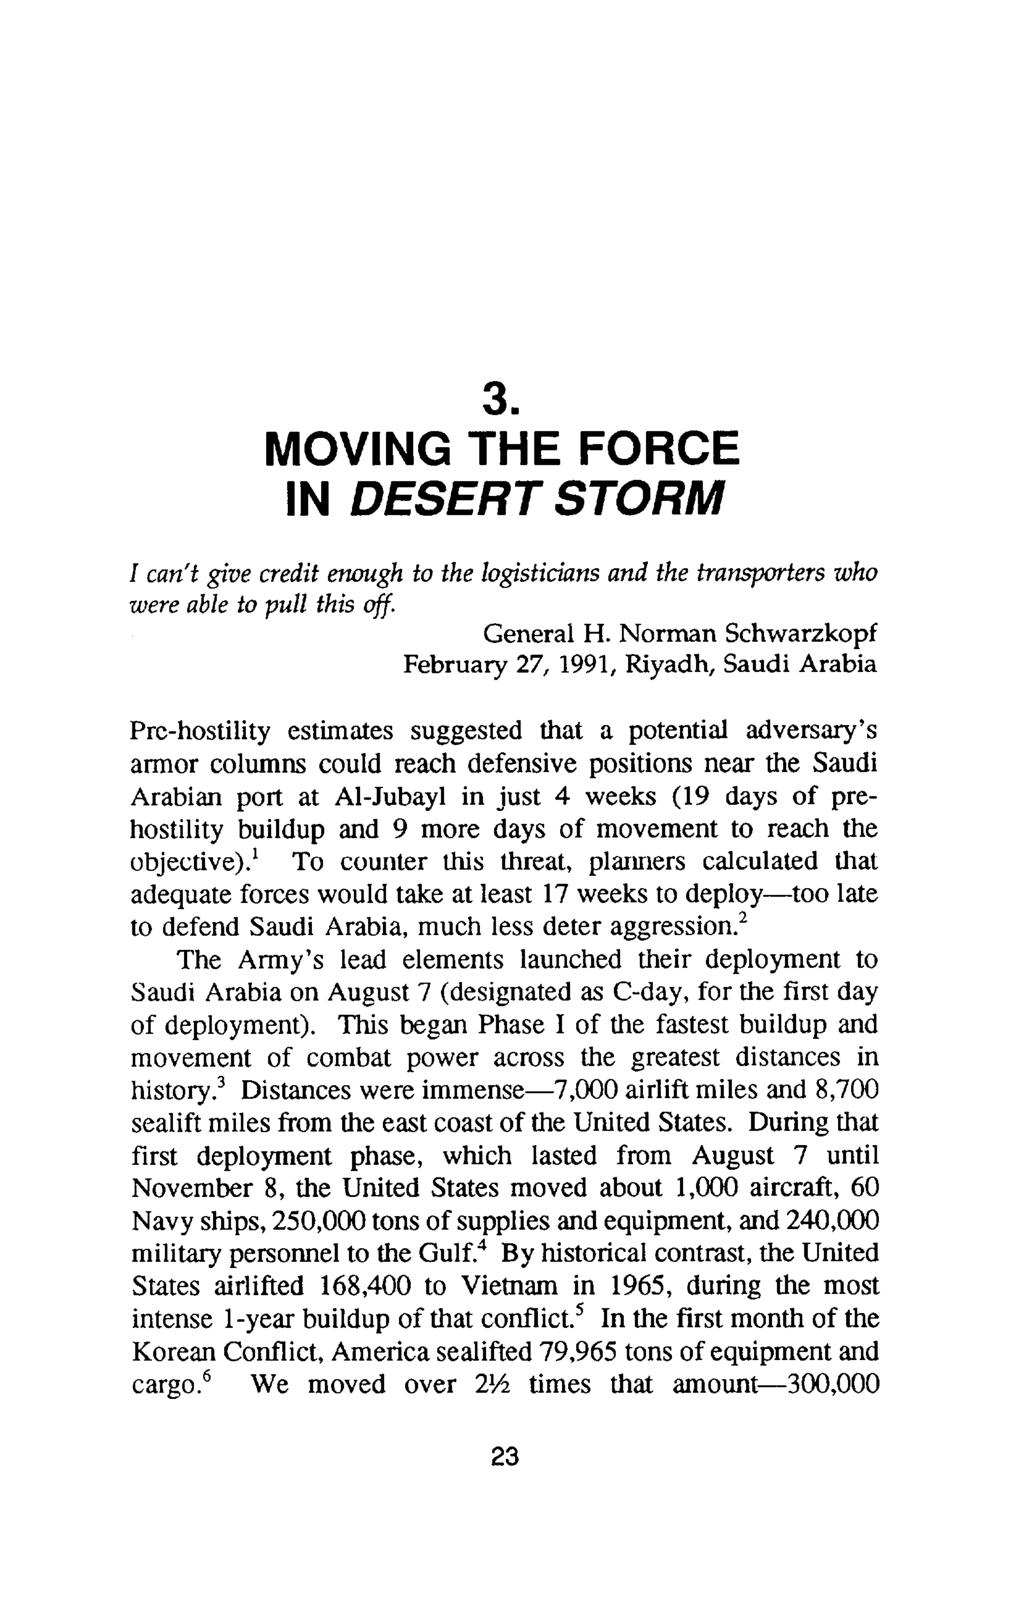 MOVING THE FORCE IN DESERT STORM m I can't give credit enough to the logisticians and the transporters who were able to pull this off. General H.